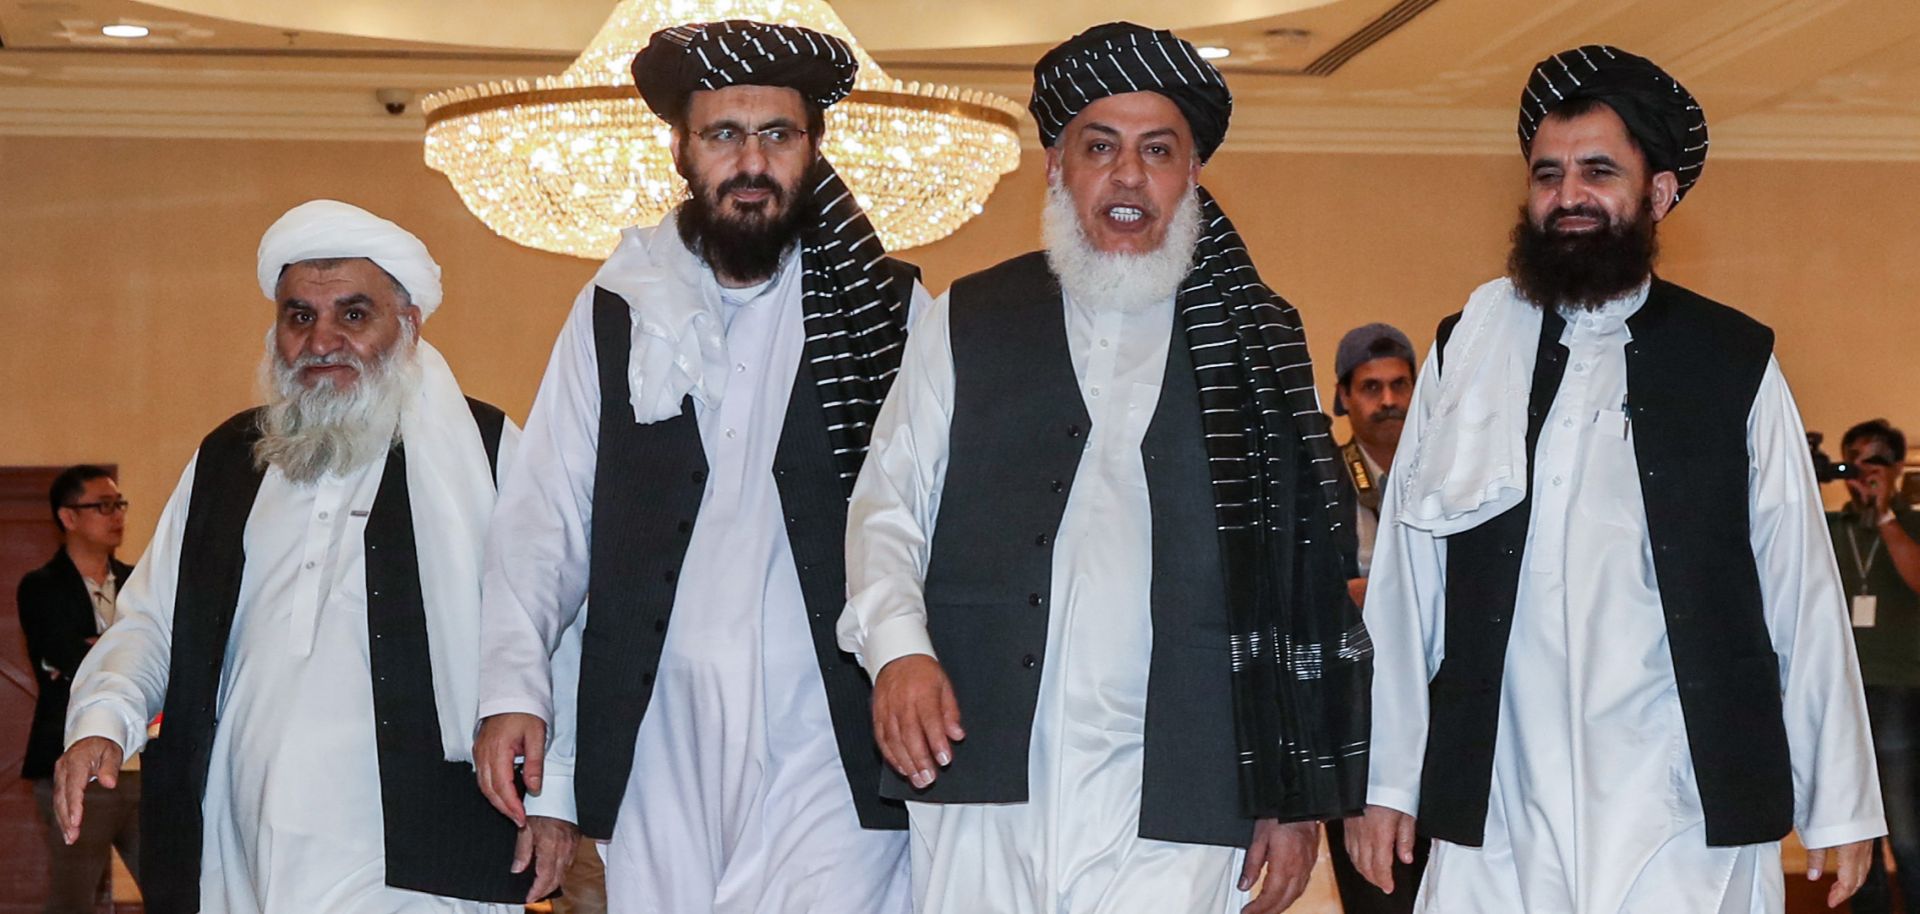 Mohammad Nabi Omari (C-L), a Taliban member formerly held by the United States at Guantanamo Bay, Taliban negotiator Abbas Stanikzai (C-R) and former Taliban intelligence deputy Mawlawi Abdul Haq Wasiq (R) walk with another Taliban member during the second day of the Intra-Afghan Dialogue talks in Doha on July 8, 2019.